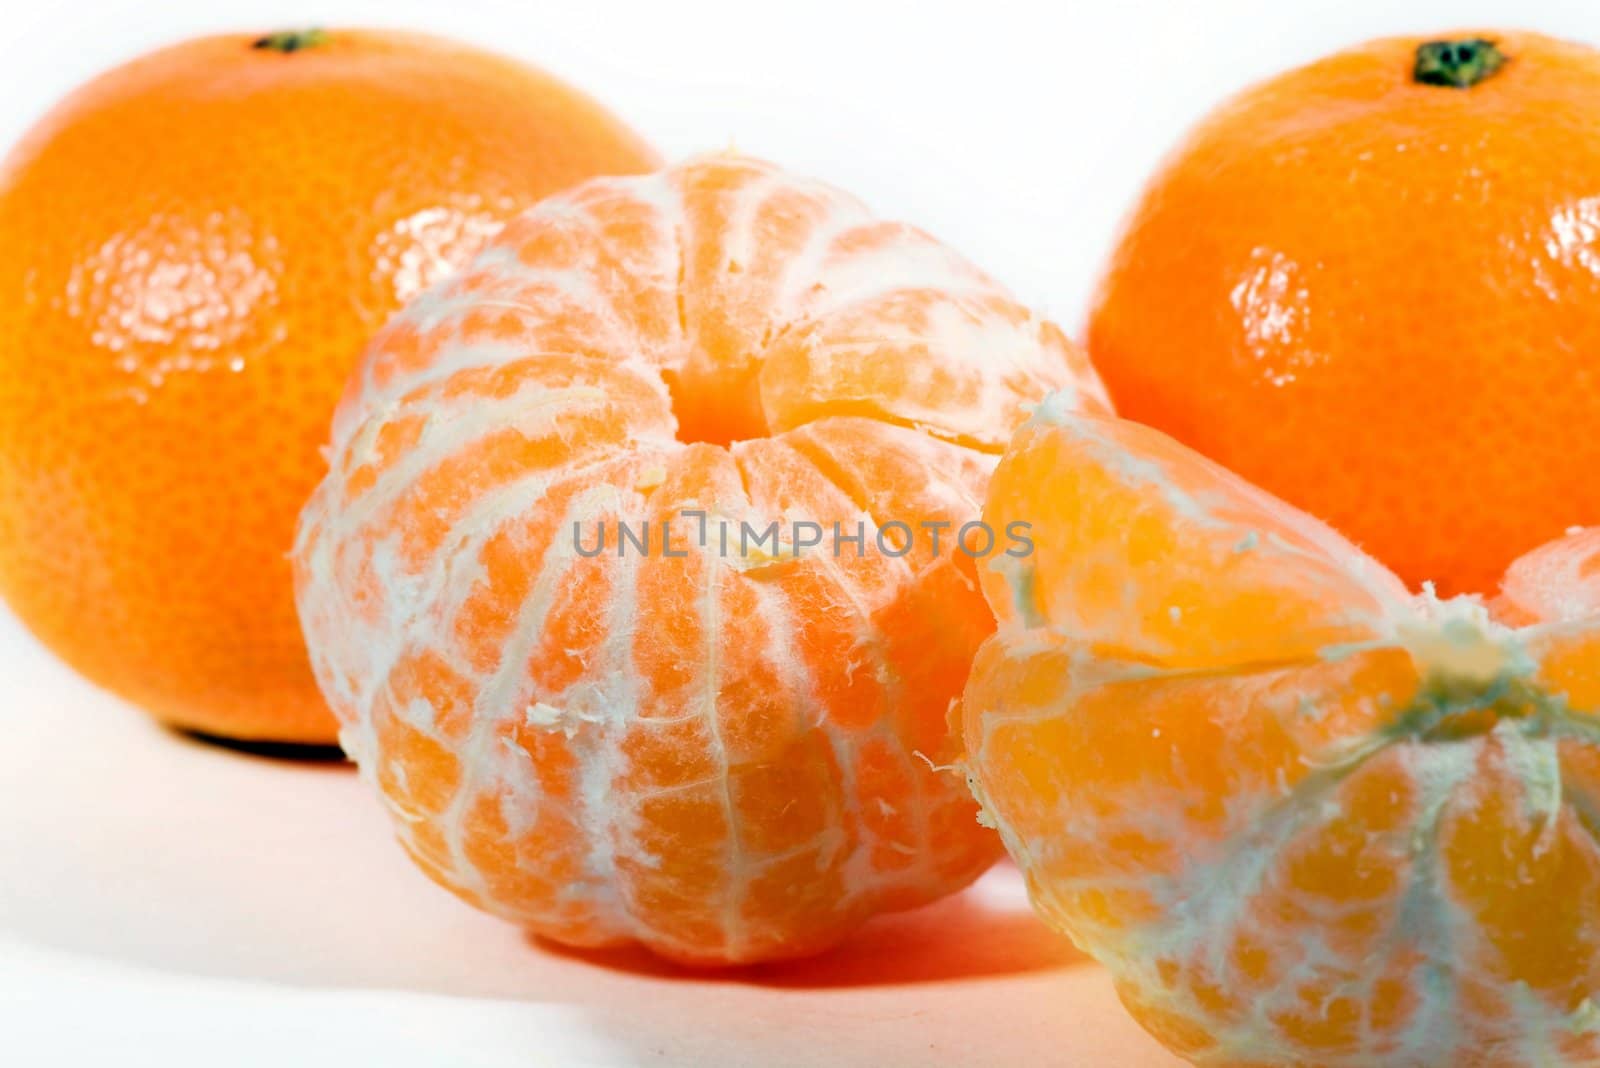 Tangerines on the wite background